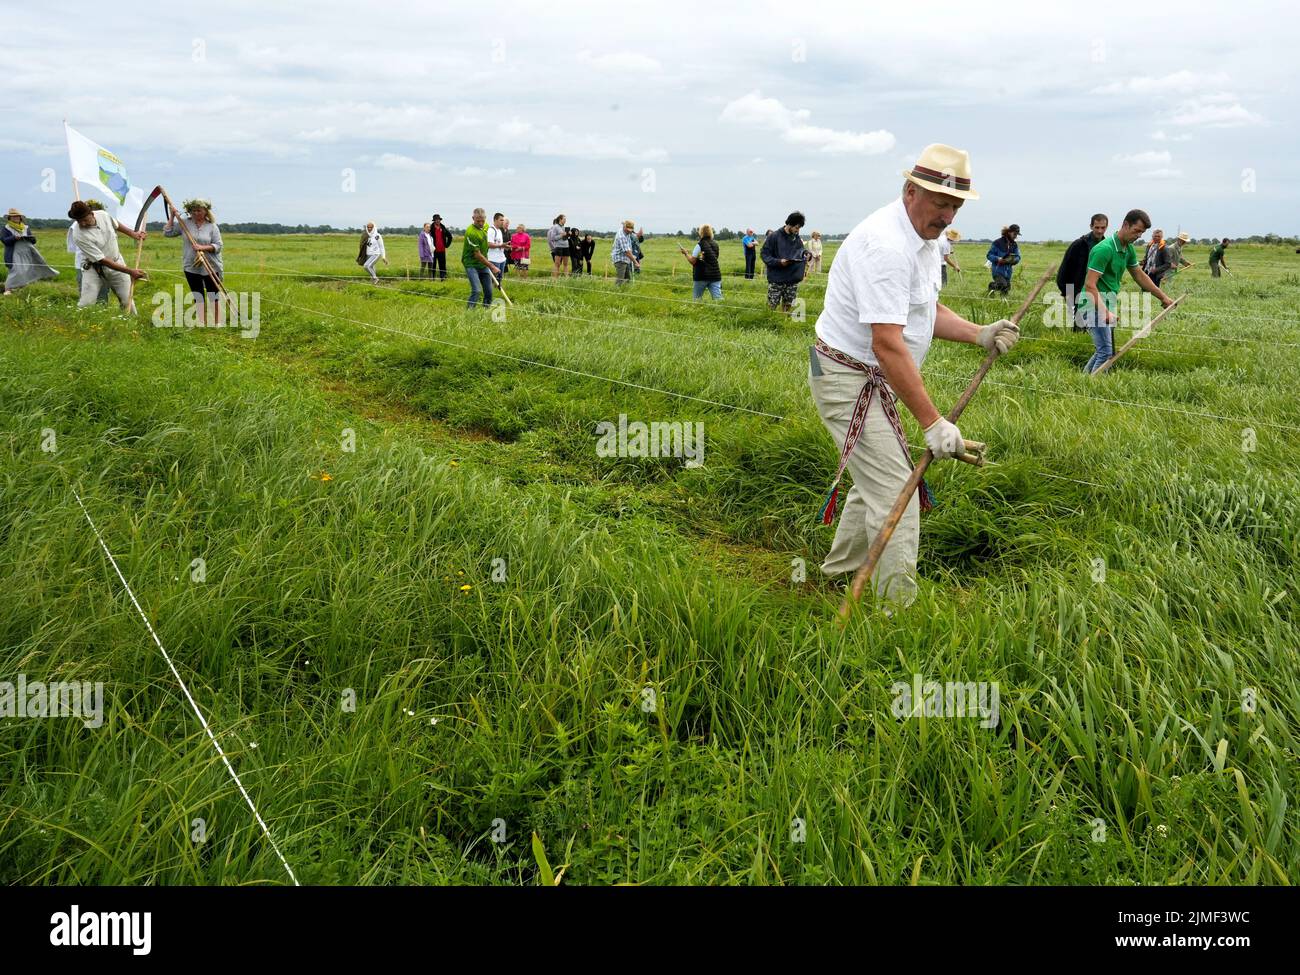 Participants compete during Lithuanian mowing championship to cut down grass using scythes in Rupkalviai, Lithuania  August 6, 2022. REUTERS/Ints Kalnins Stock Photo